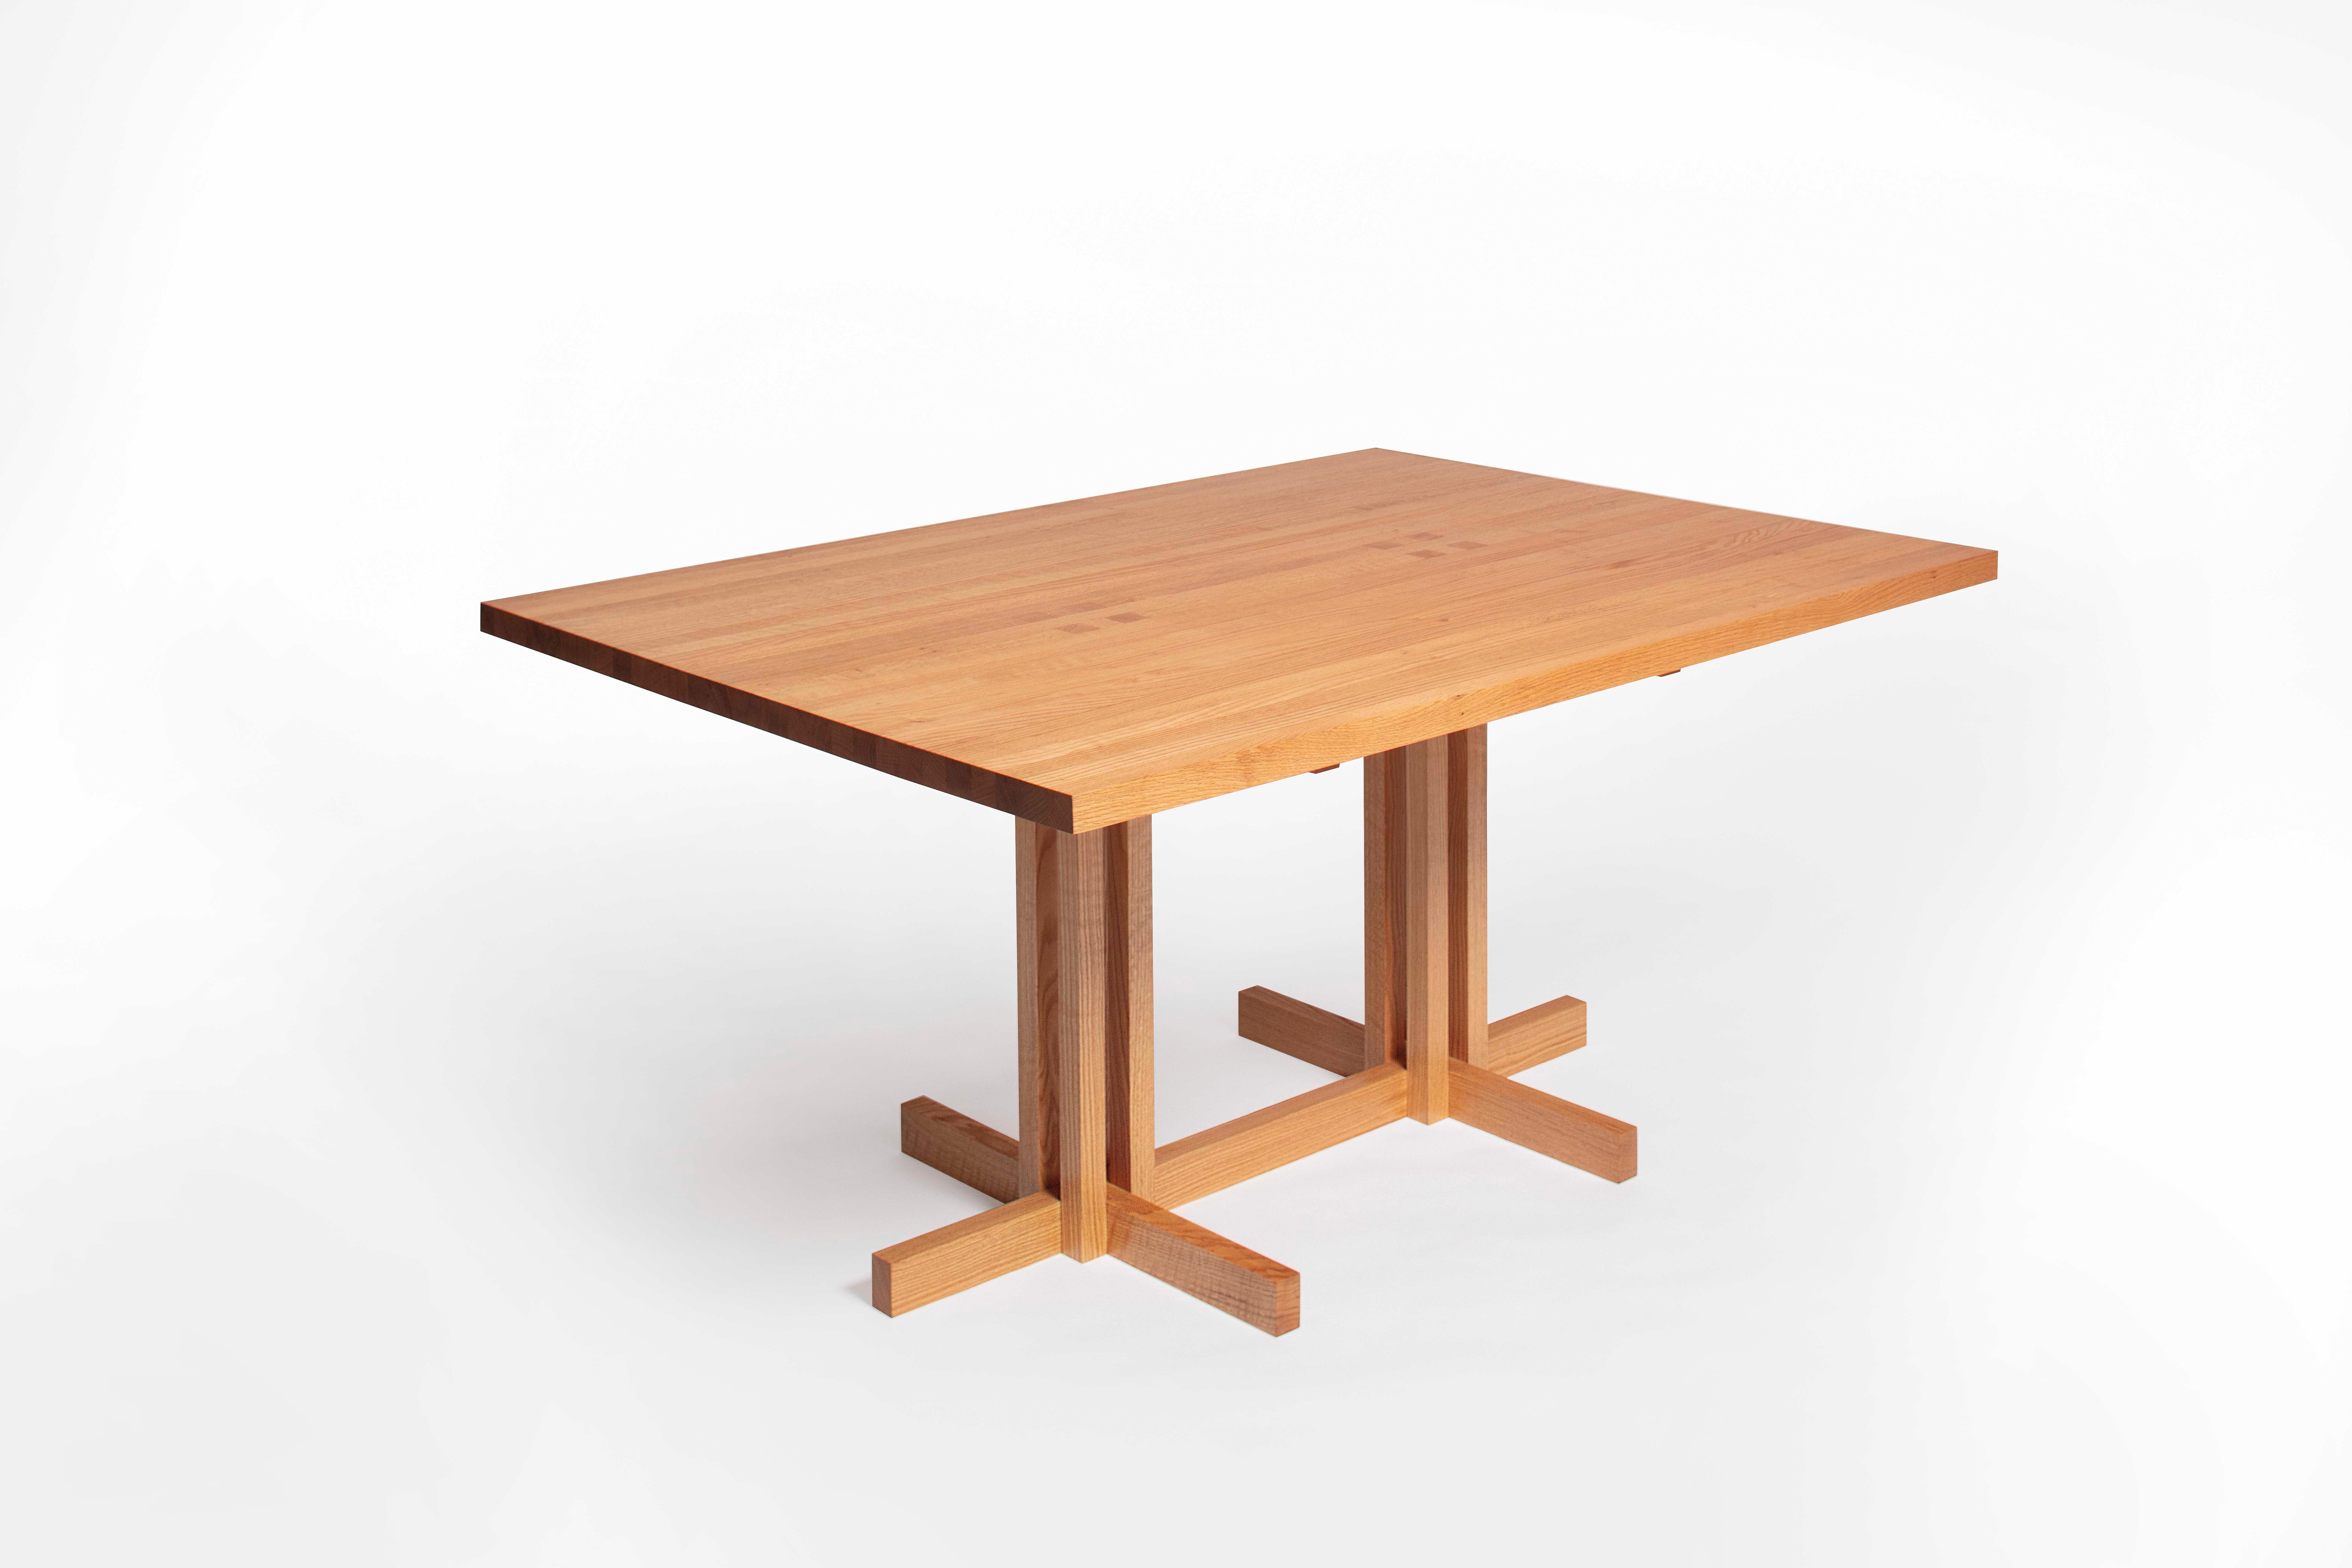 Ray Kappe RK9 dining table in red oak by Original in Berlin, Germany, 2020

California Modernism is synonymous with sophisticated minimal structures, featuring open plan design and indoor-outdoor living, inspired by traditional Japanese